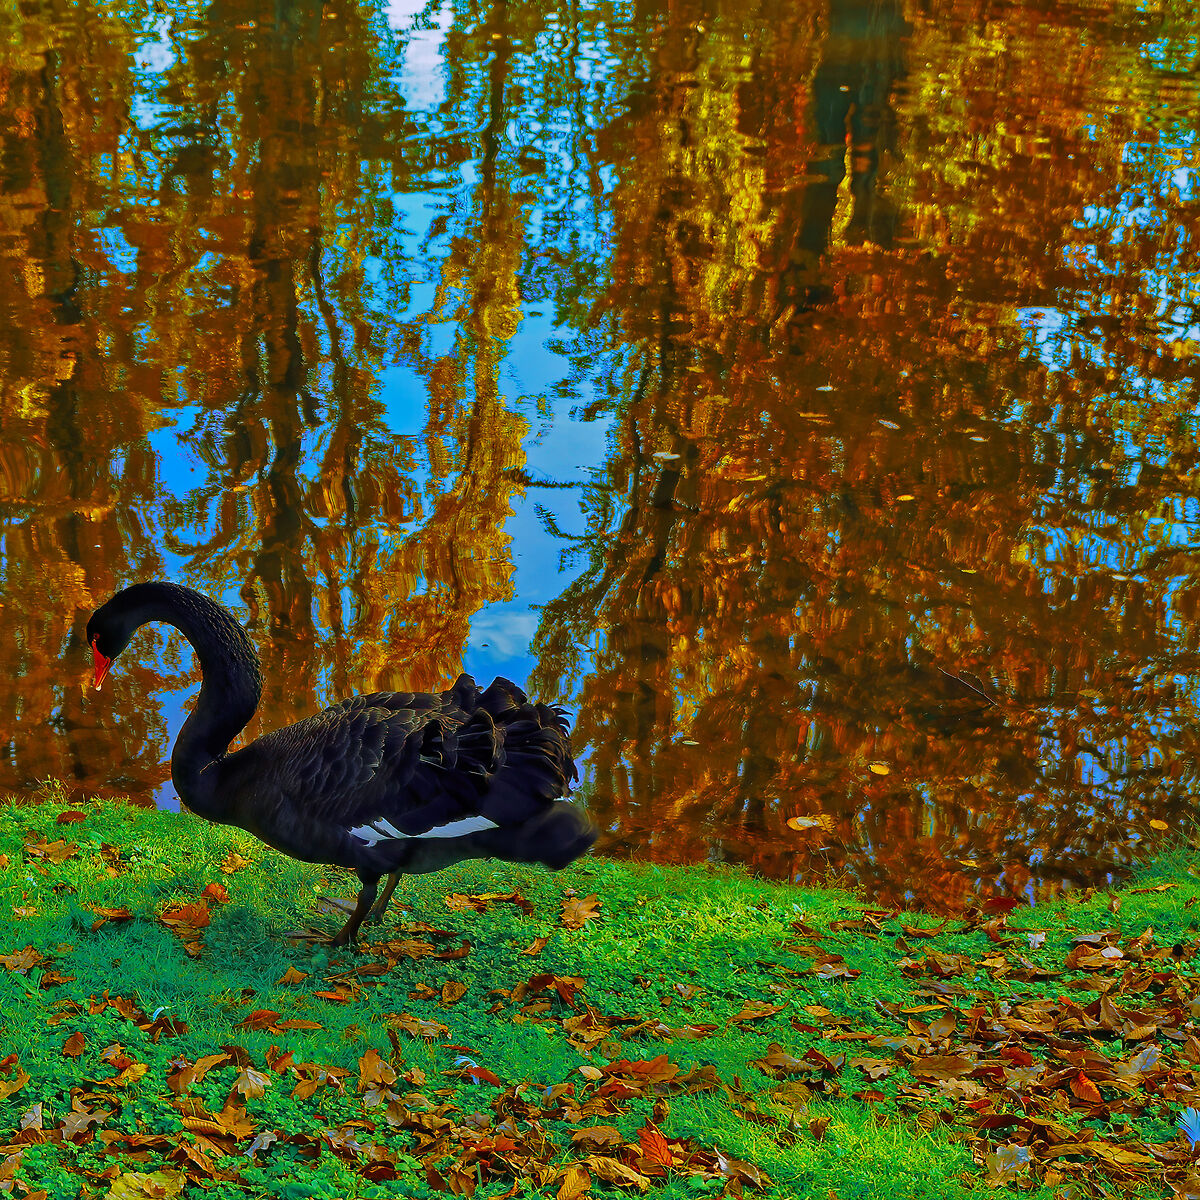 Reflected foliage with black swan...